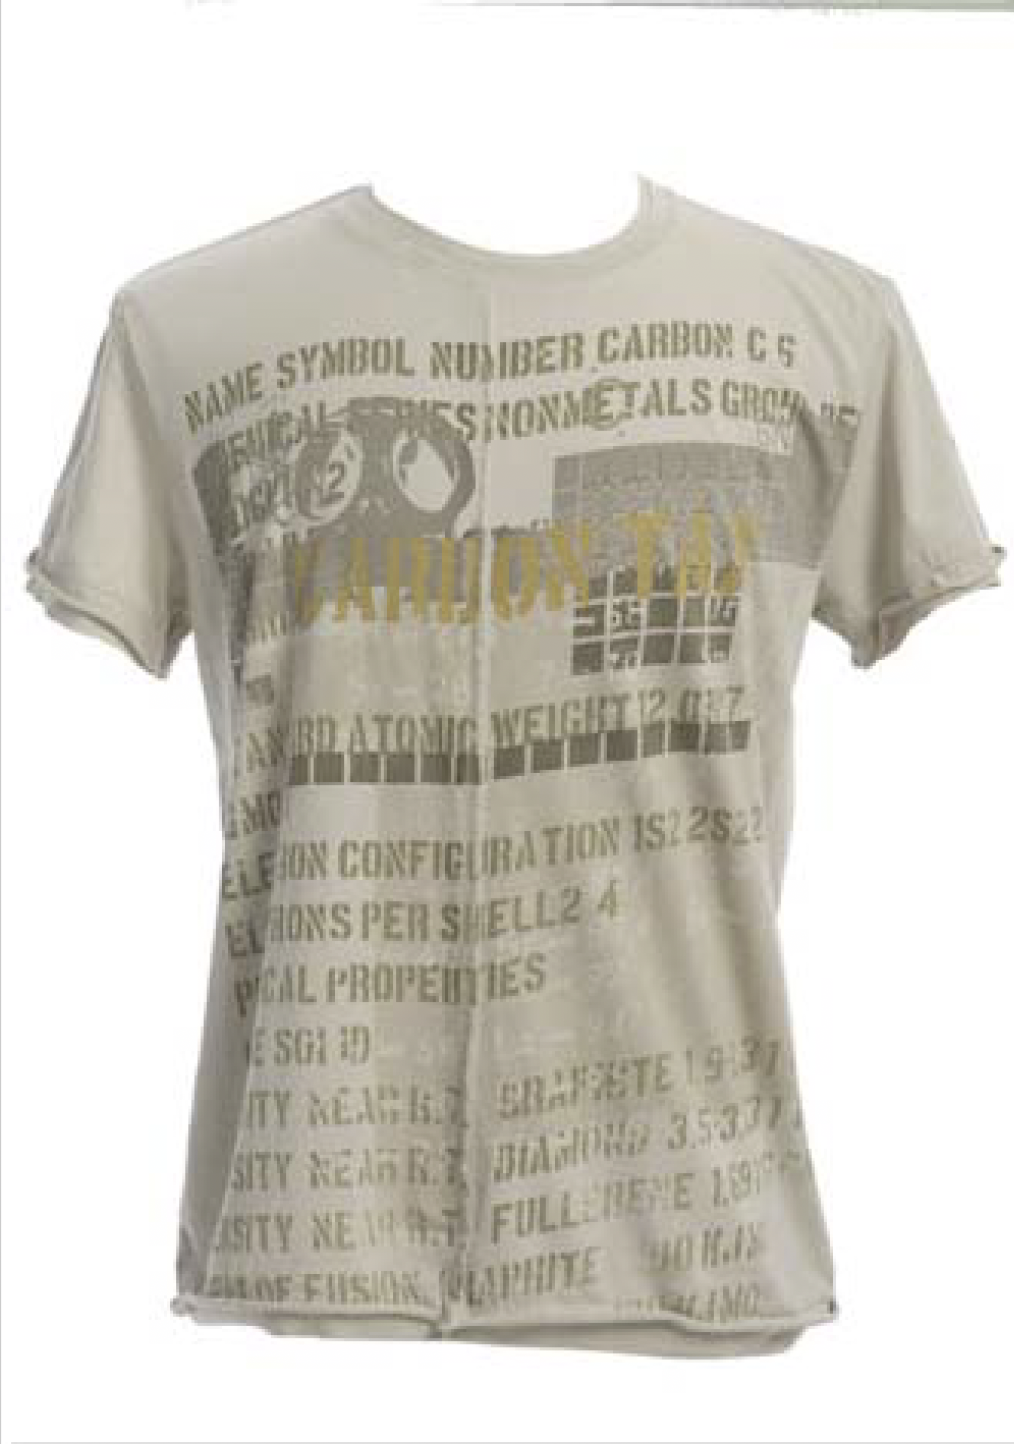 Itsus Vintage Men's T-Shirt "Carbon Tax" in Rattan (2009 Collection) - Email Us to Order